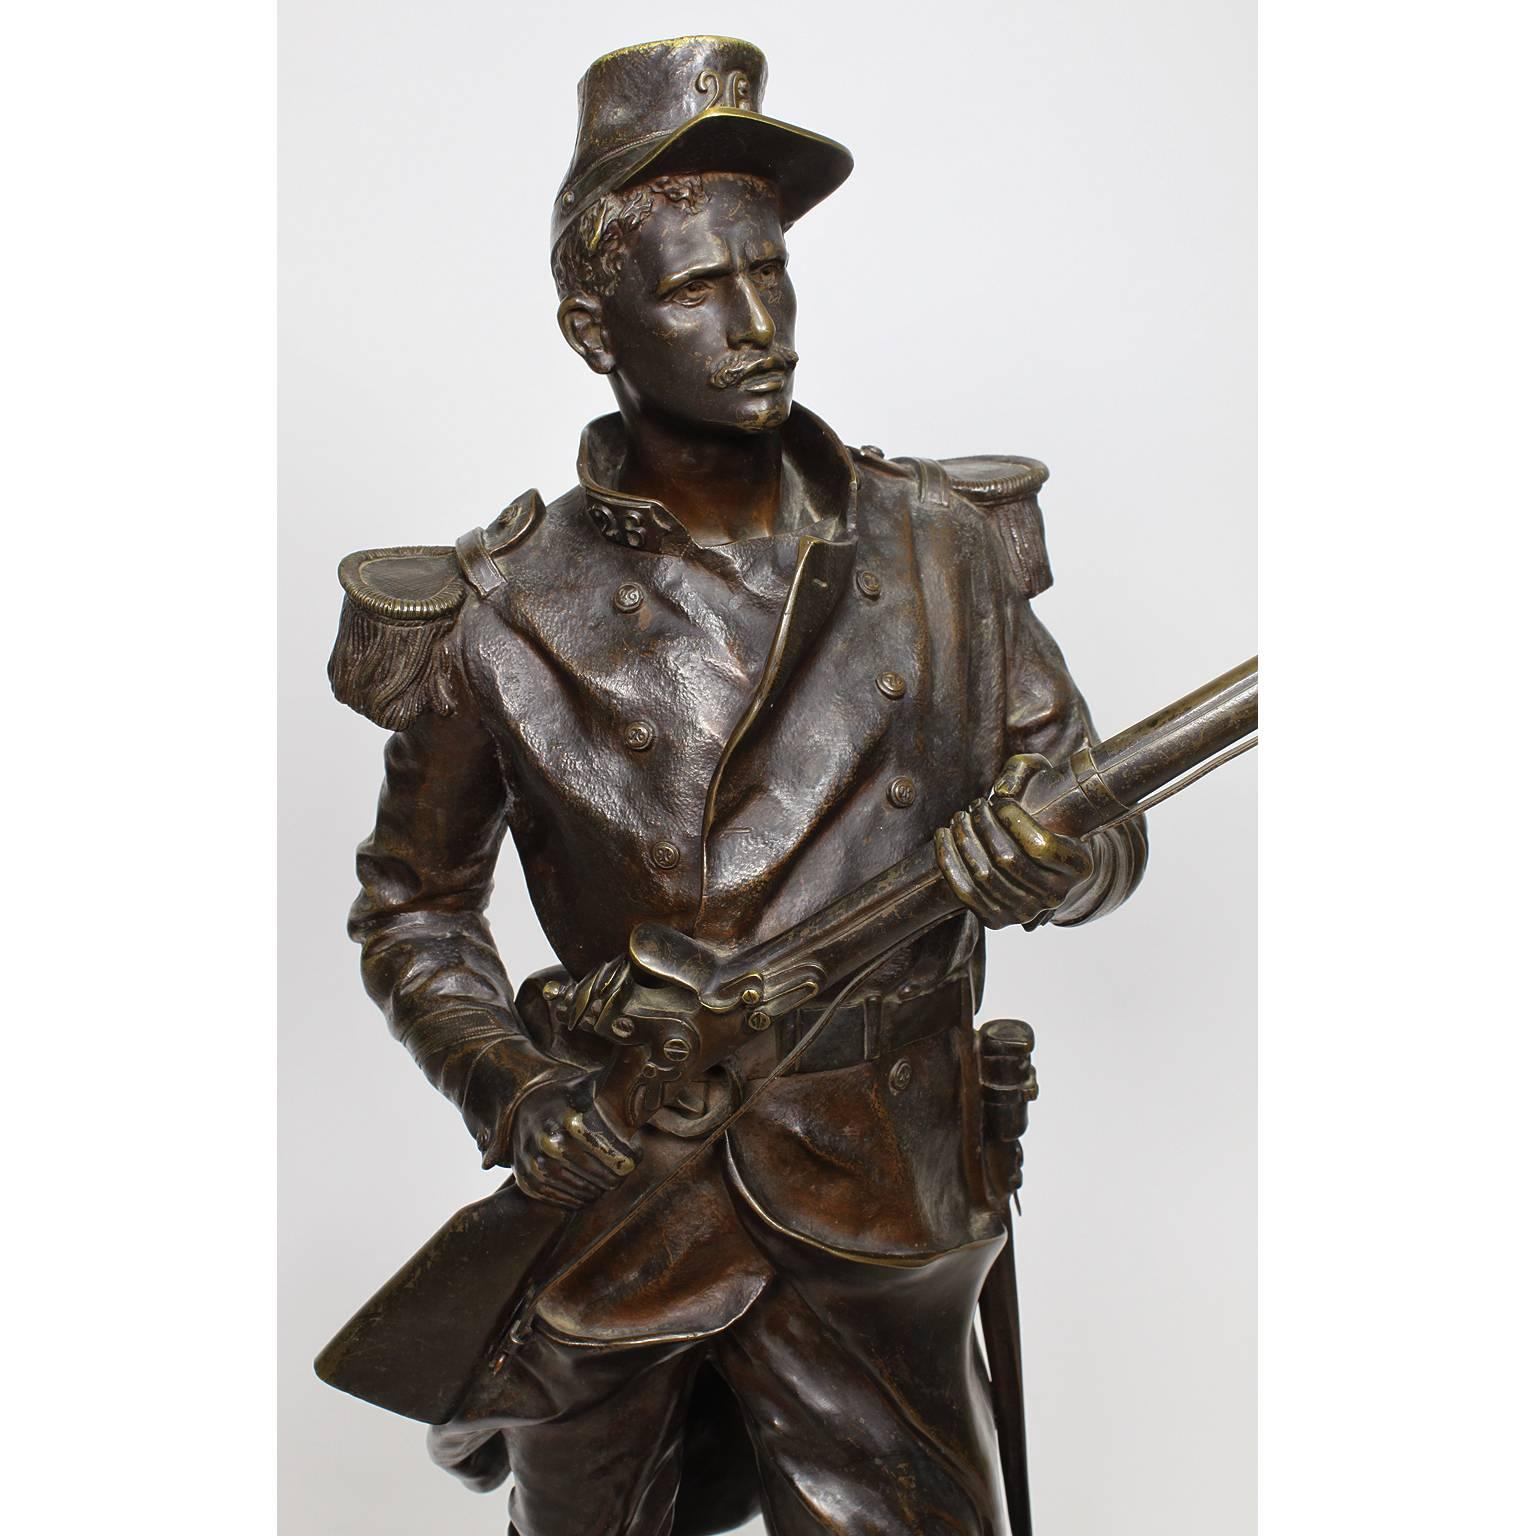 A very fine French 19th century patinated bronze figure of the French hero of the Algerian conquest, Jean-Pierre Hippolyte Blandan (1819-1842) after the French Sculptor Jean Gautherin (1840-1890). The standing soldier in full military garb holding